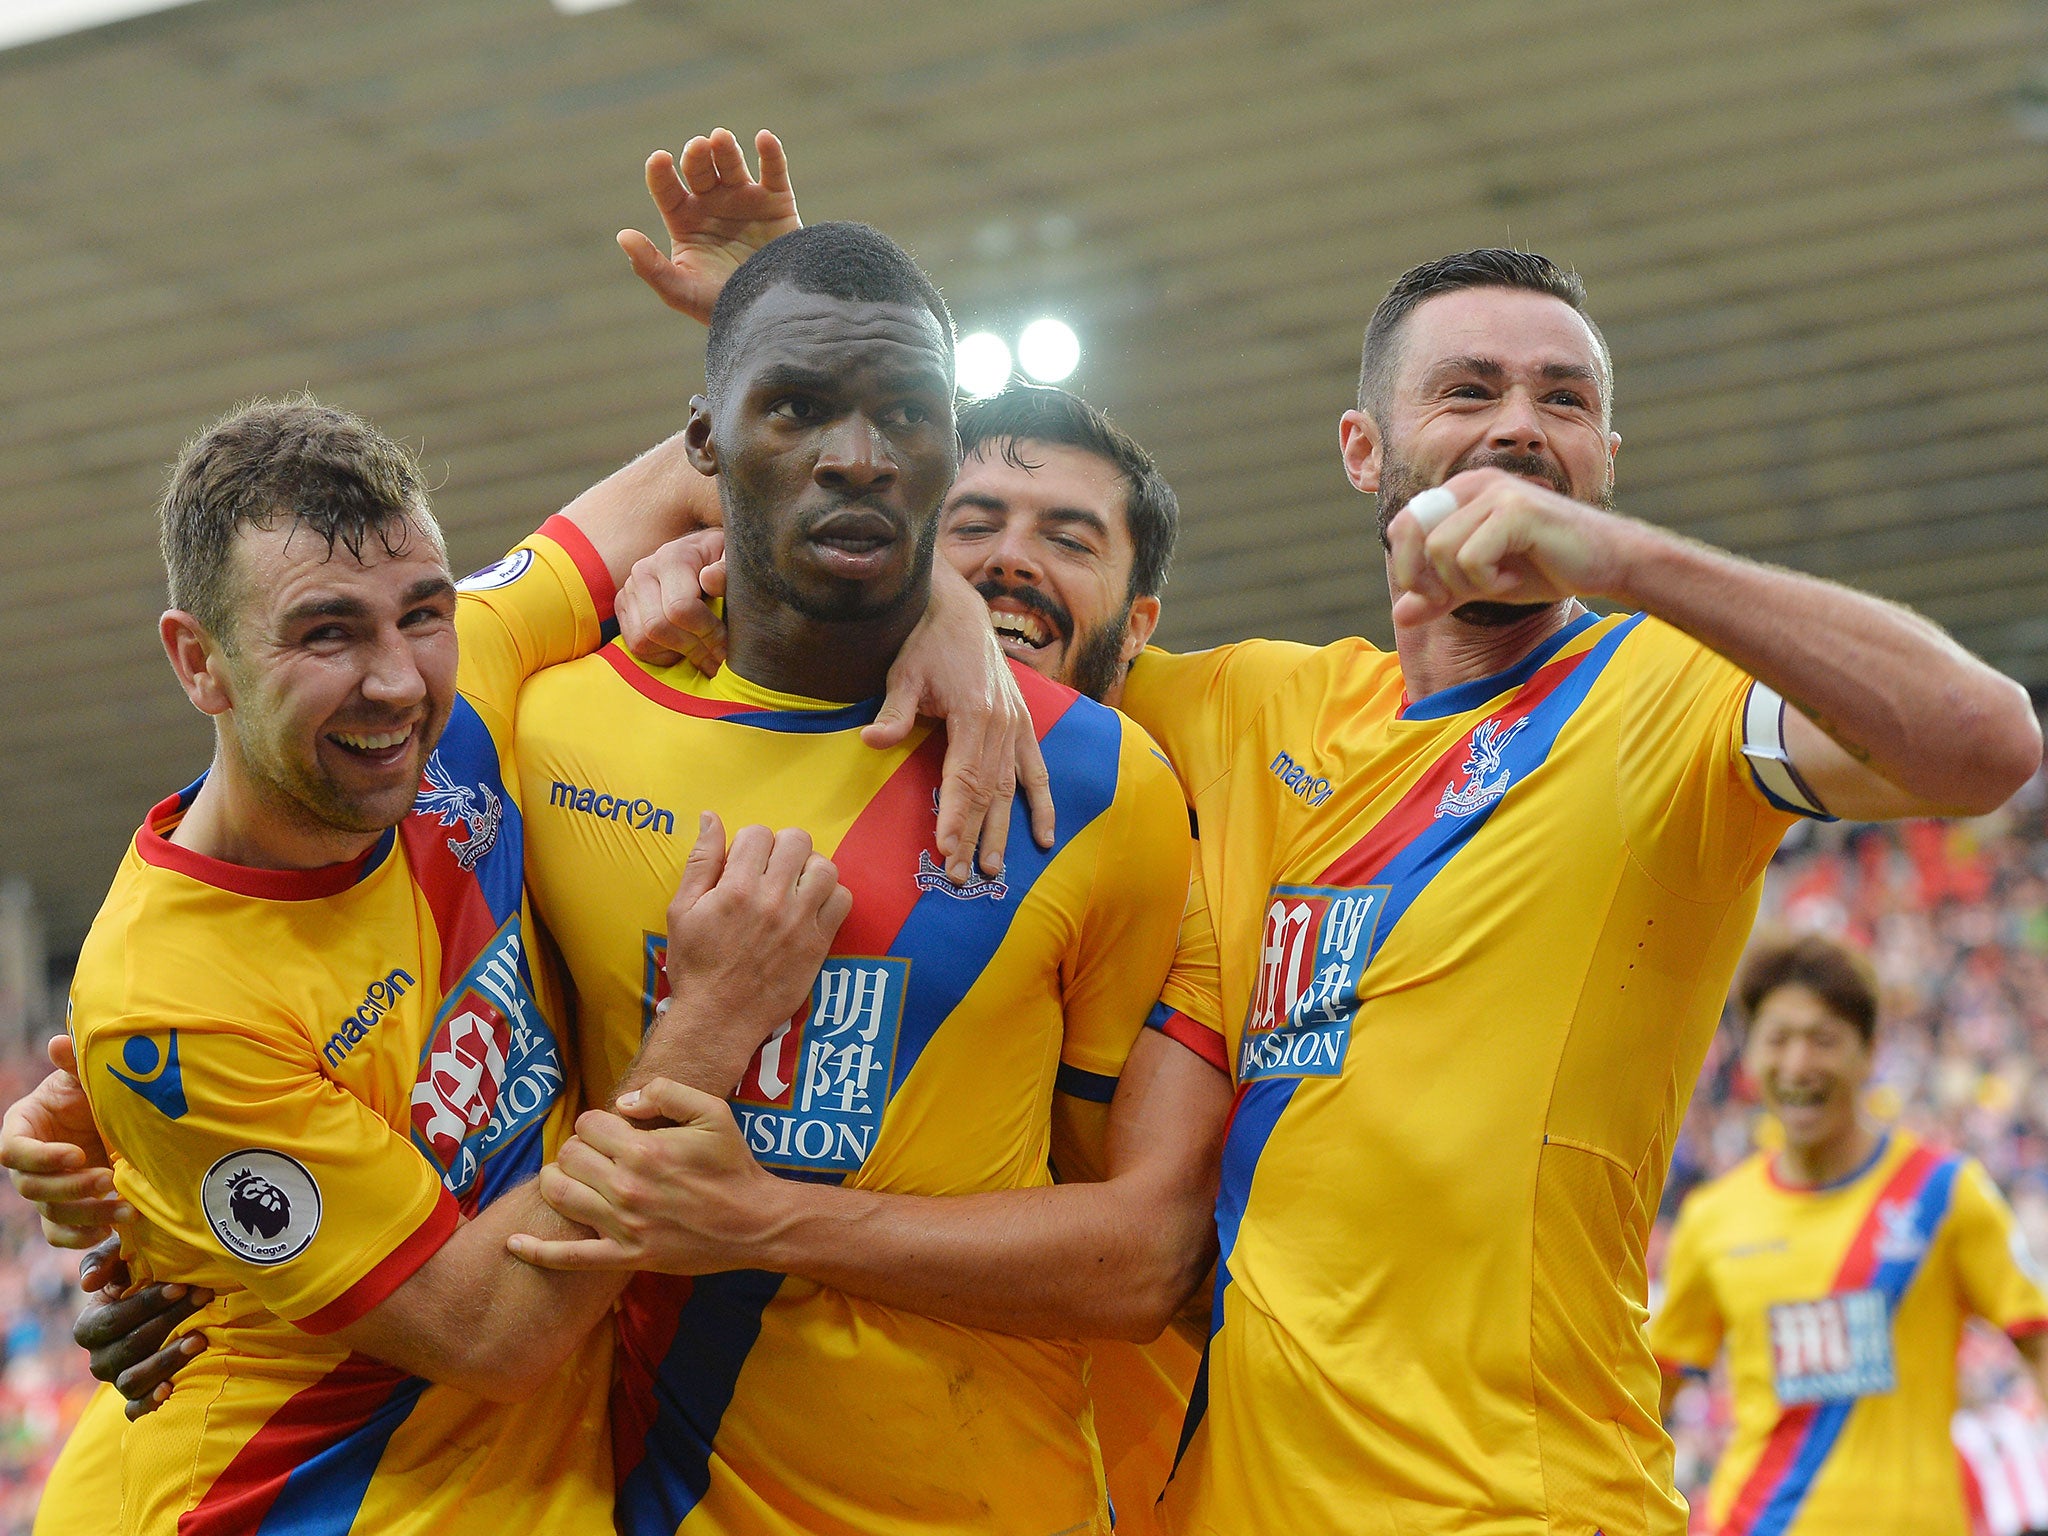 Christian Benteke added Crystal Palace's third and final goal to hand the Eagles all three points